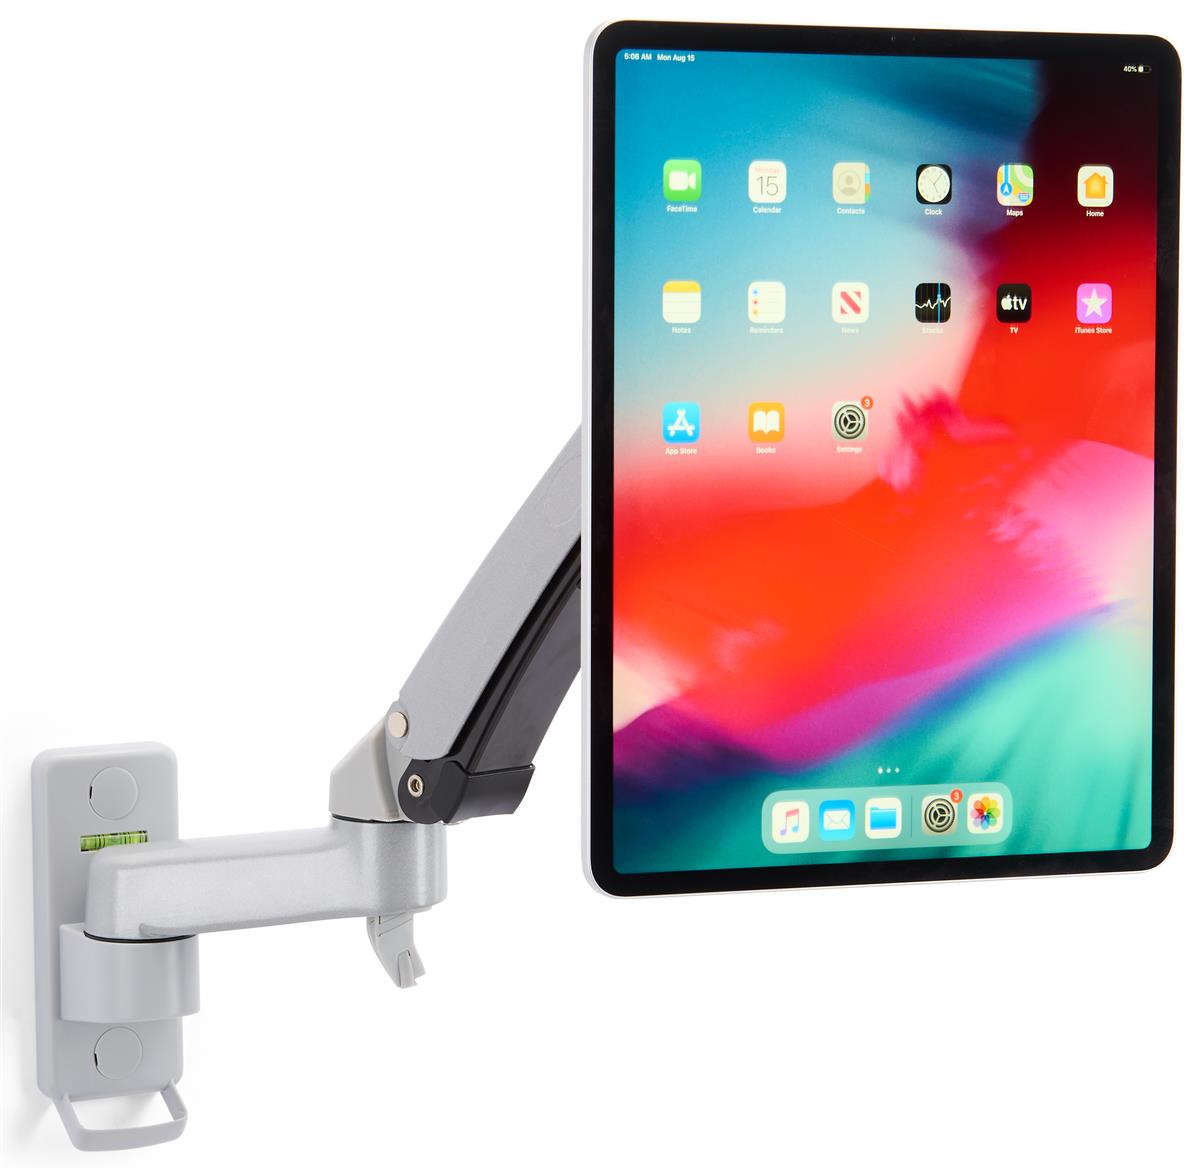 Articulating arm tablet mount with swiveling design